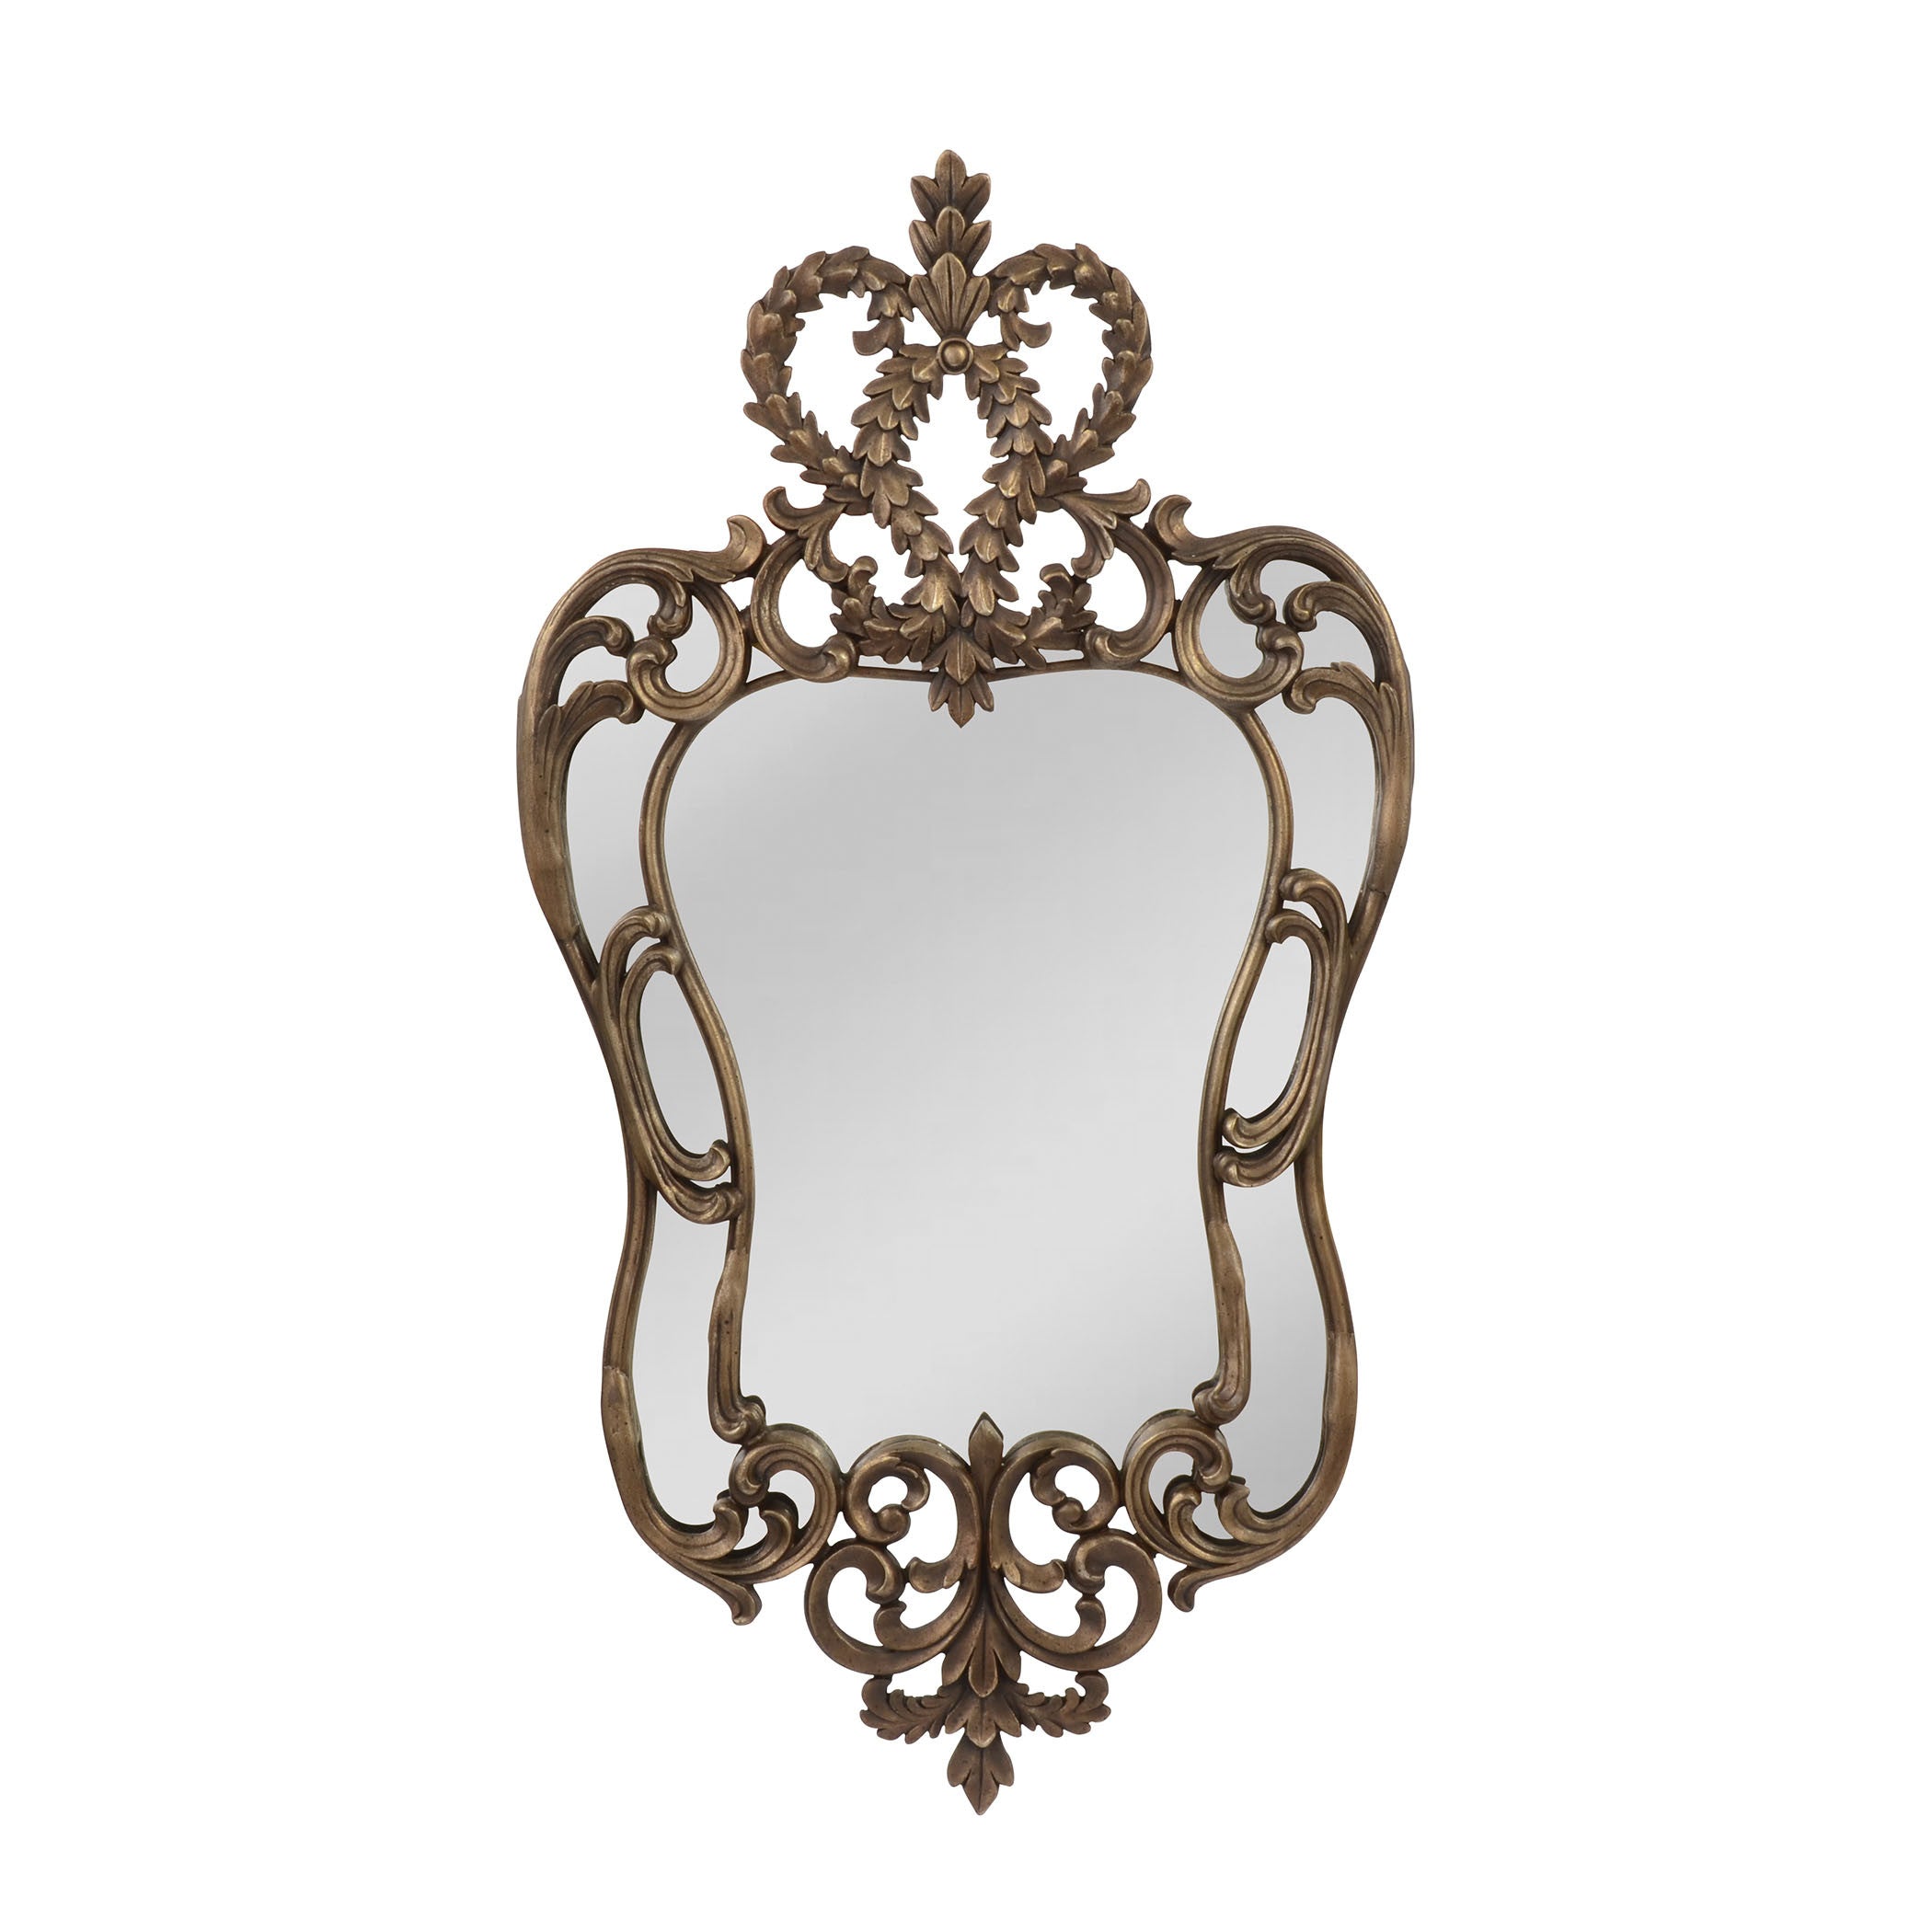 Mirror Masters Mp3259-0010 Edward Iii Collection Aged Bronze Finish Wall Mirror